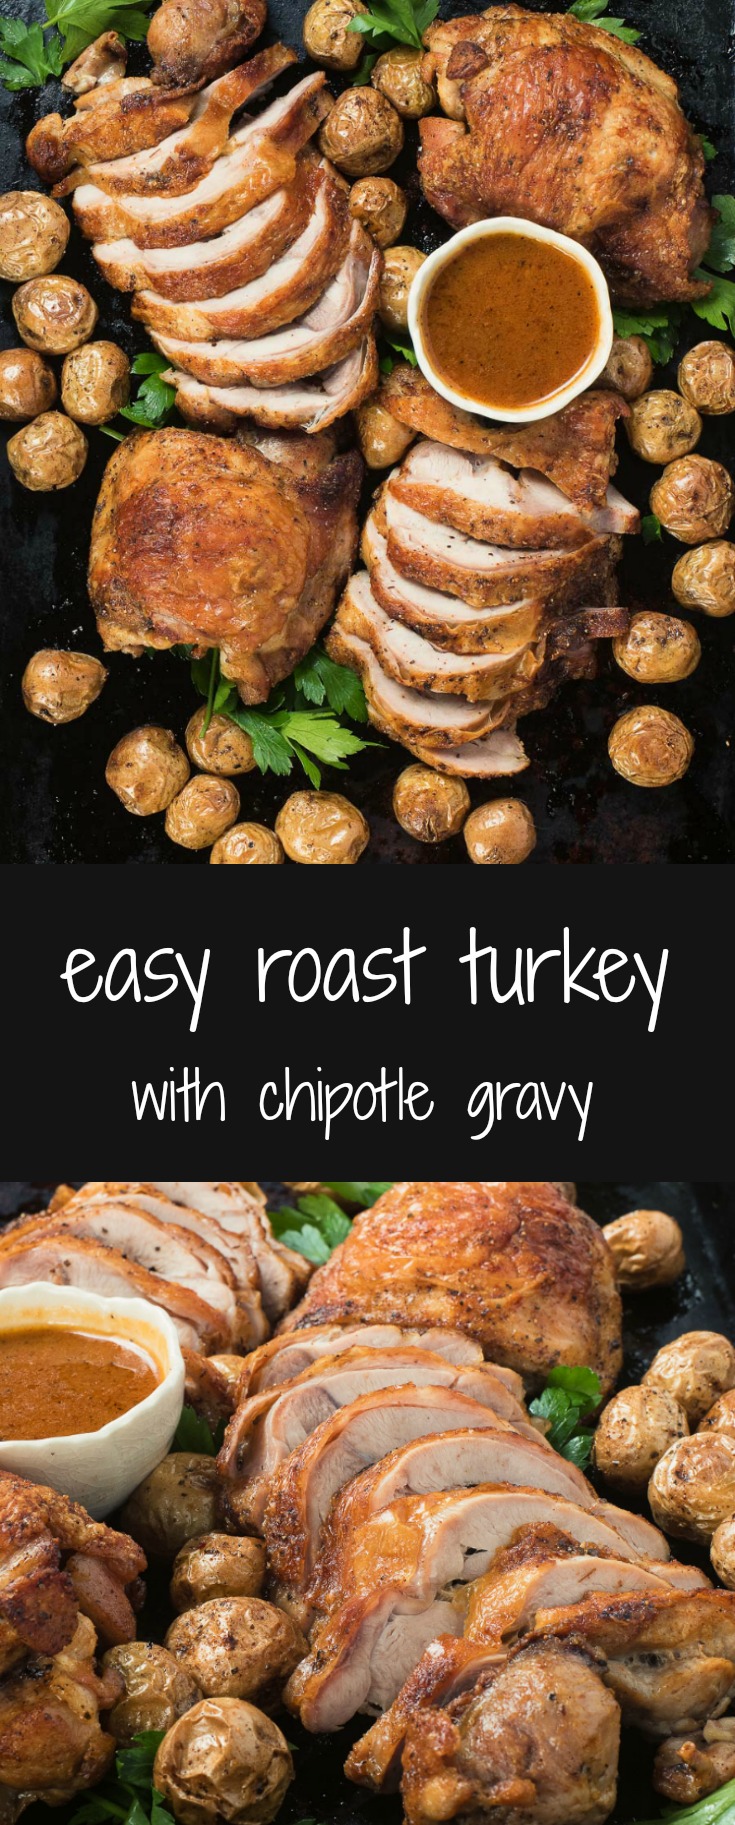 Roast turkey thighs with chipotle gravy is a great weeknight meal.